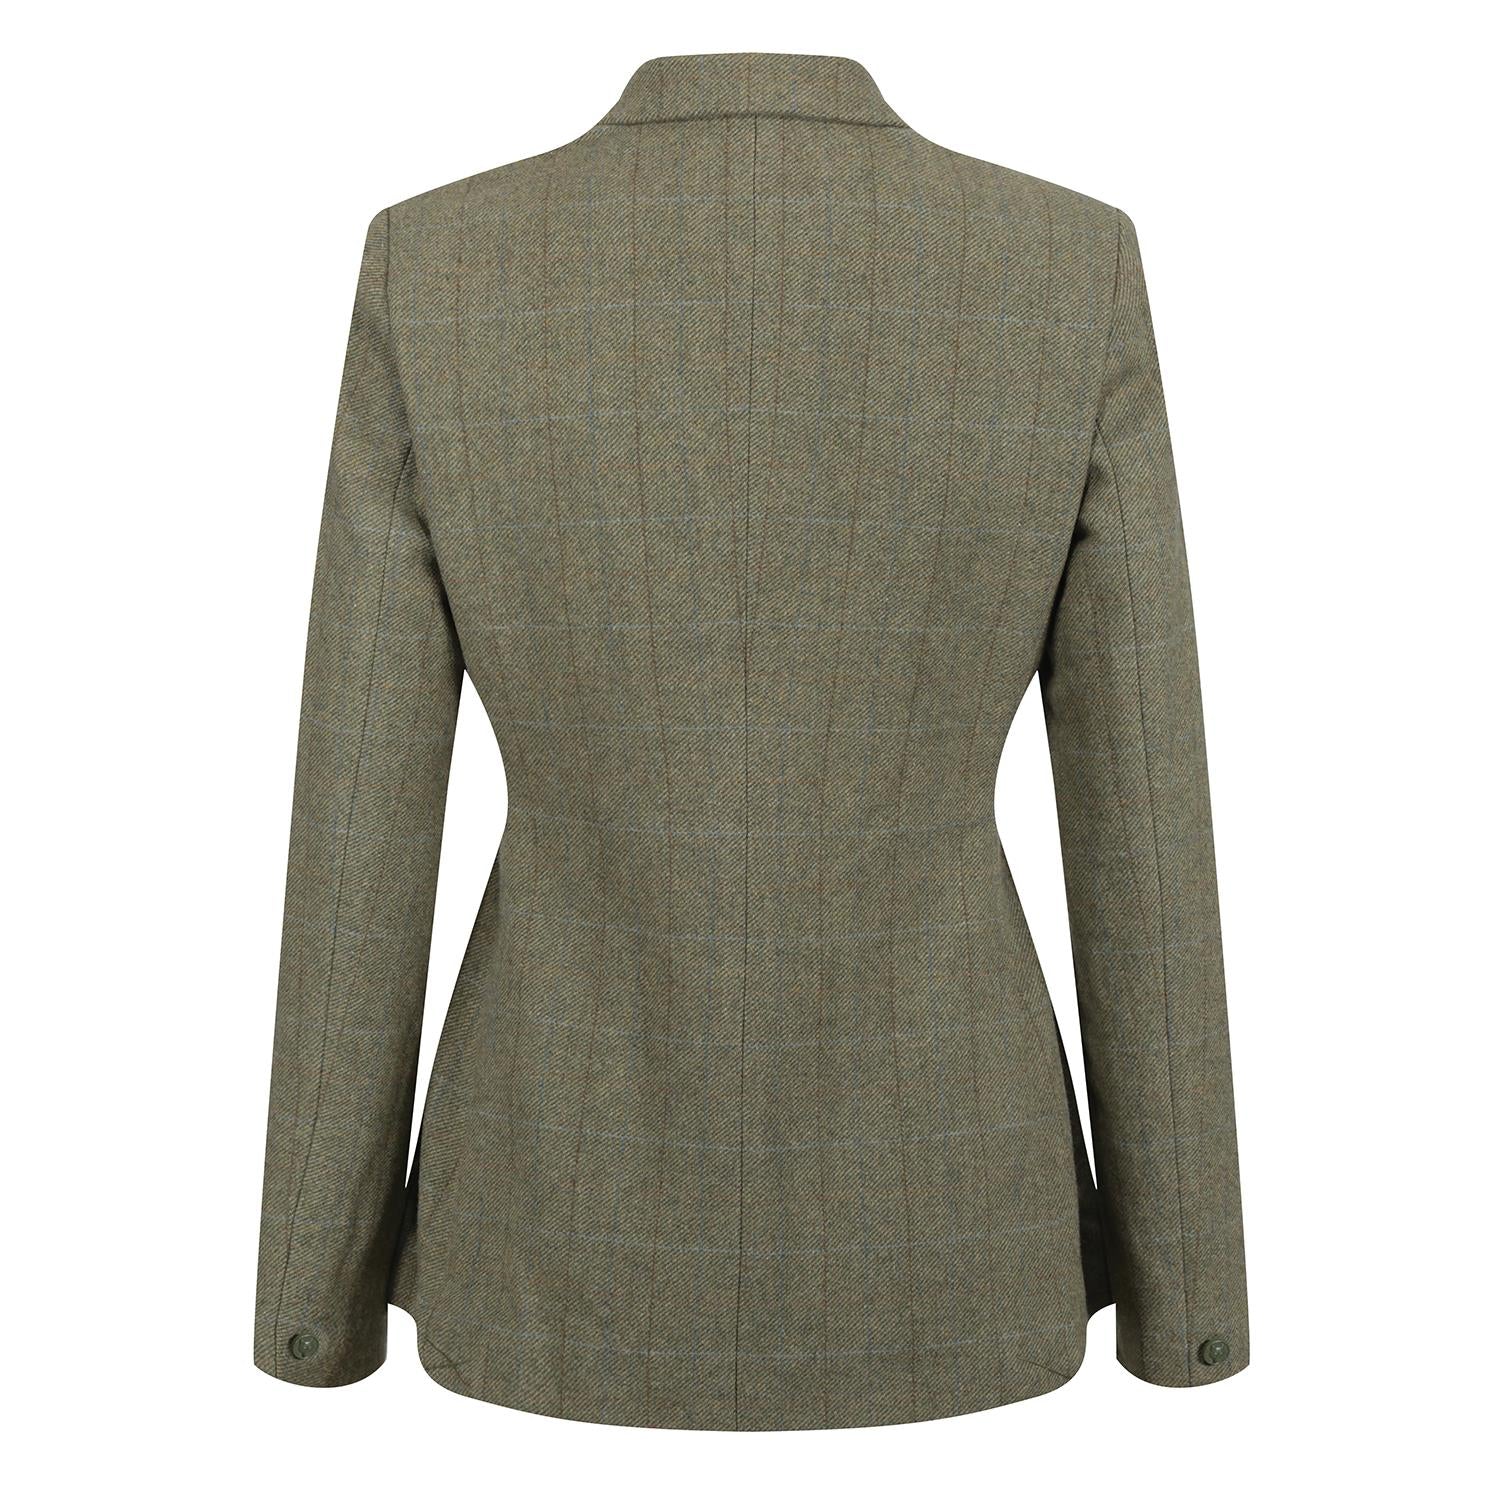 Equetech Thornborough Classic Tweed Riding Jacket - Just Horse Riders